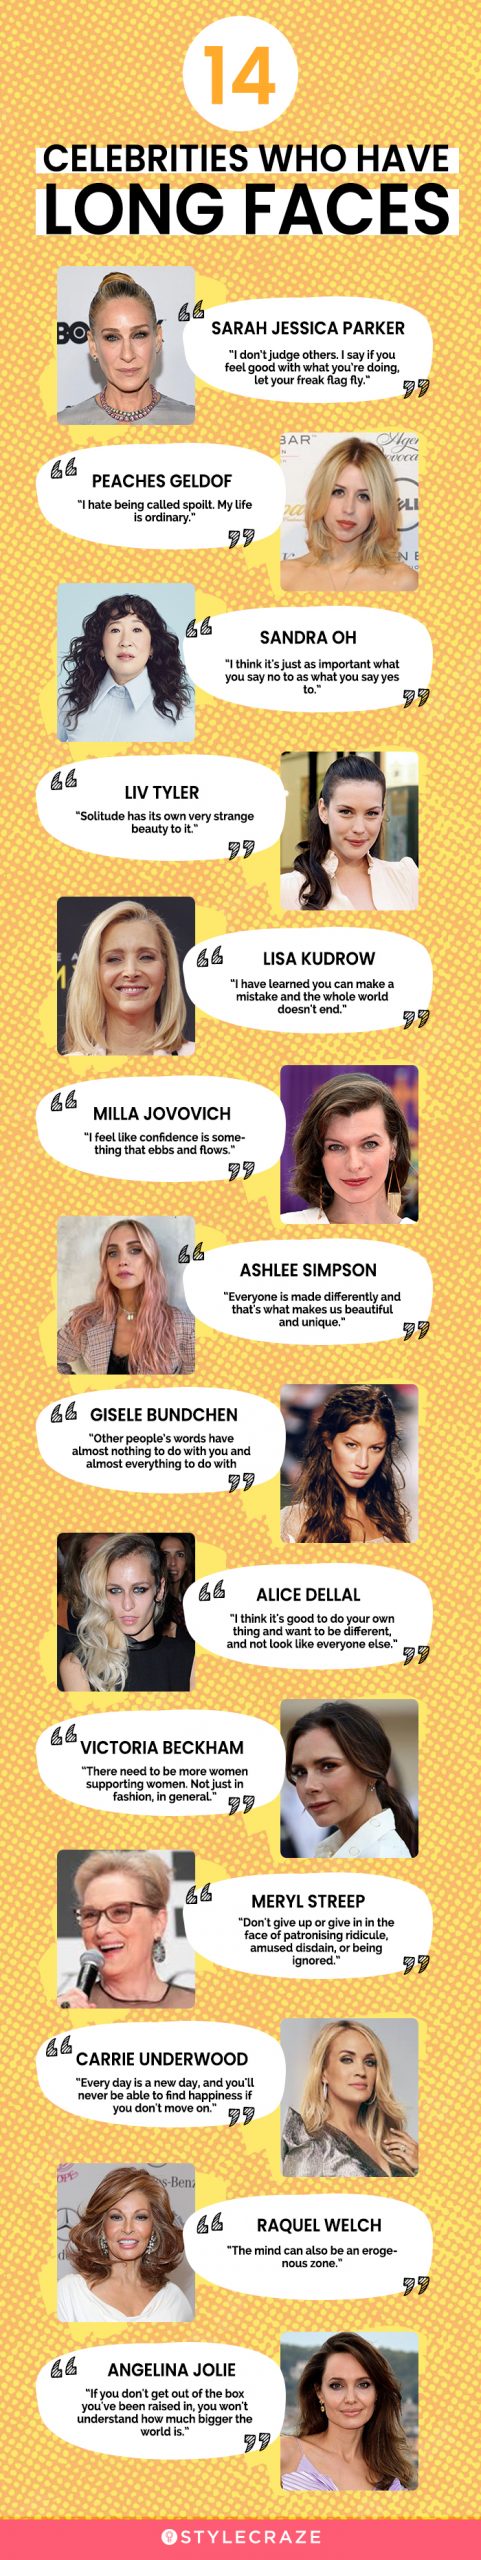 celebrities who have long faces [infographic]